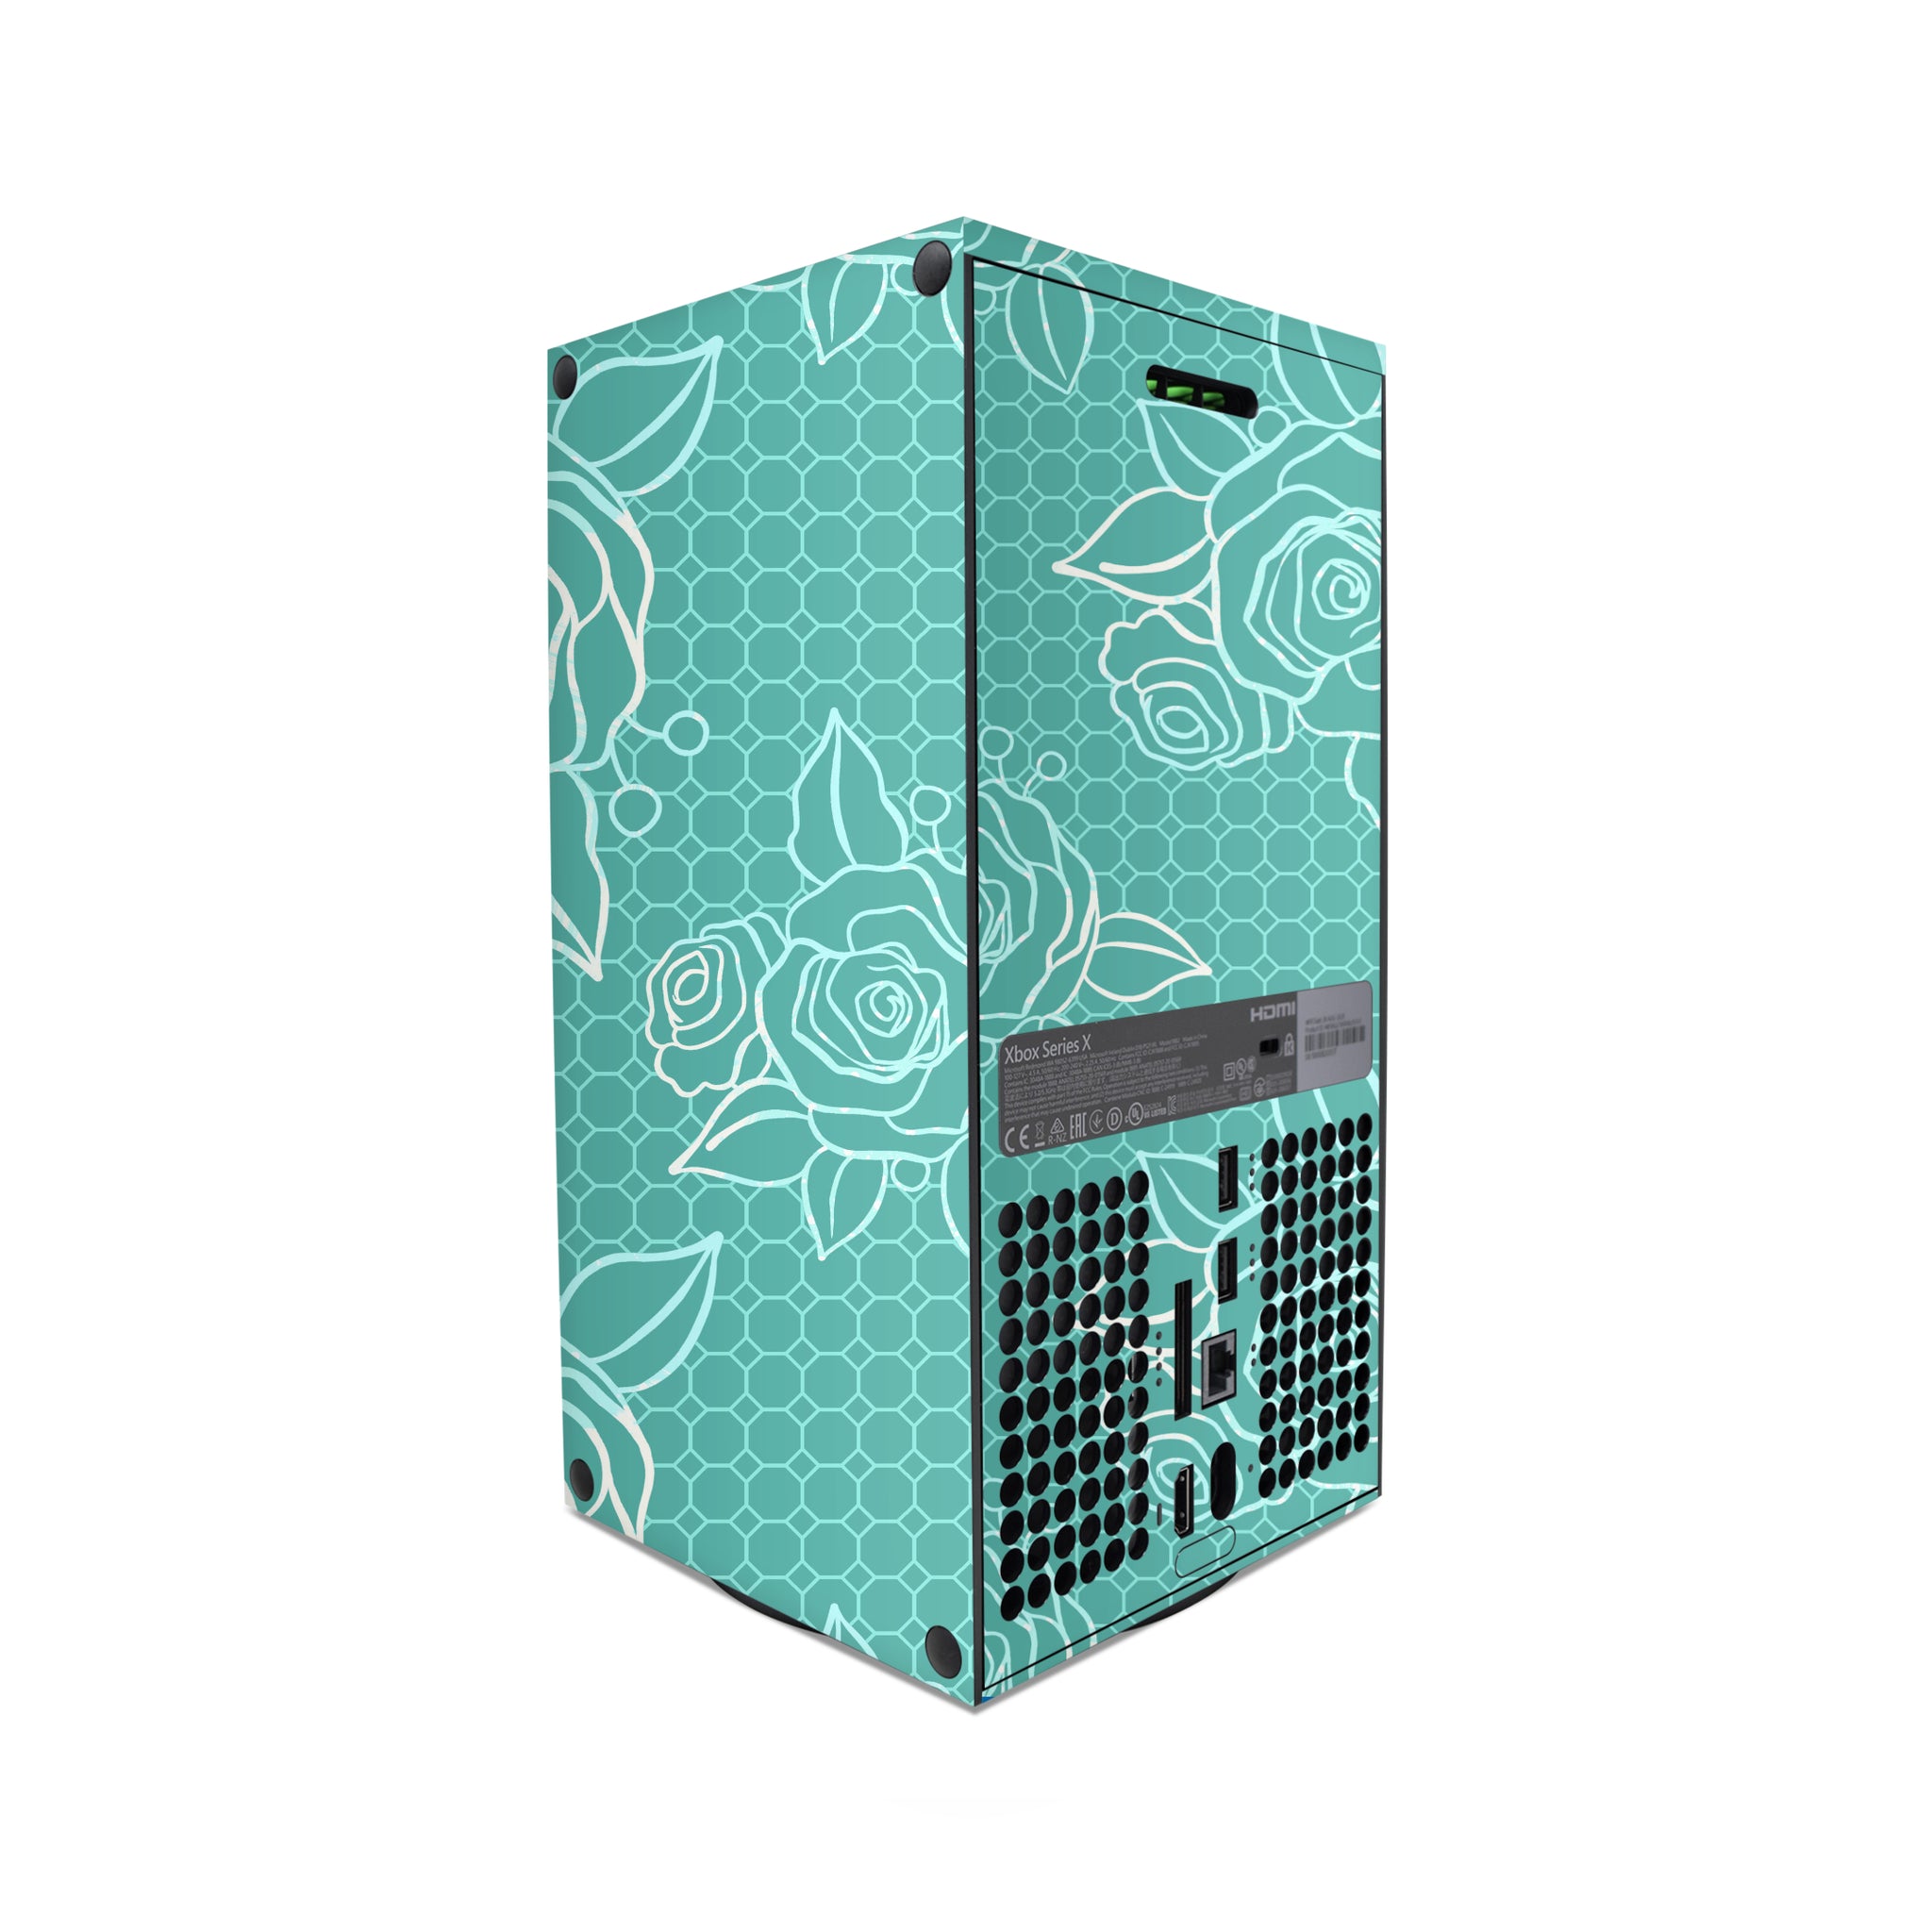 Xbox Series X - Teal Floral